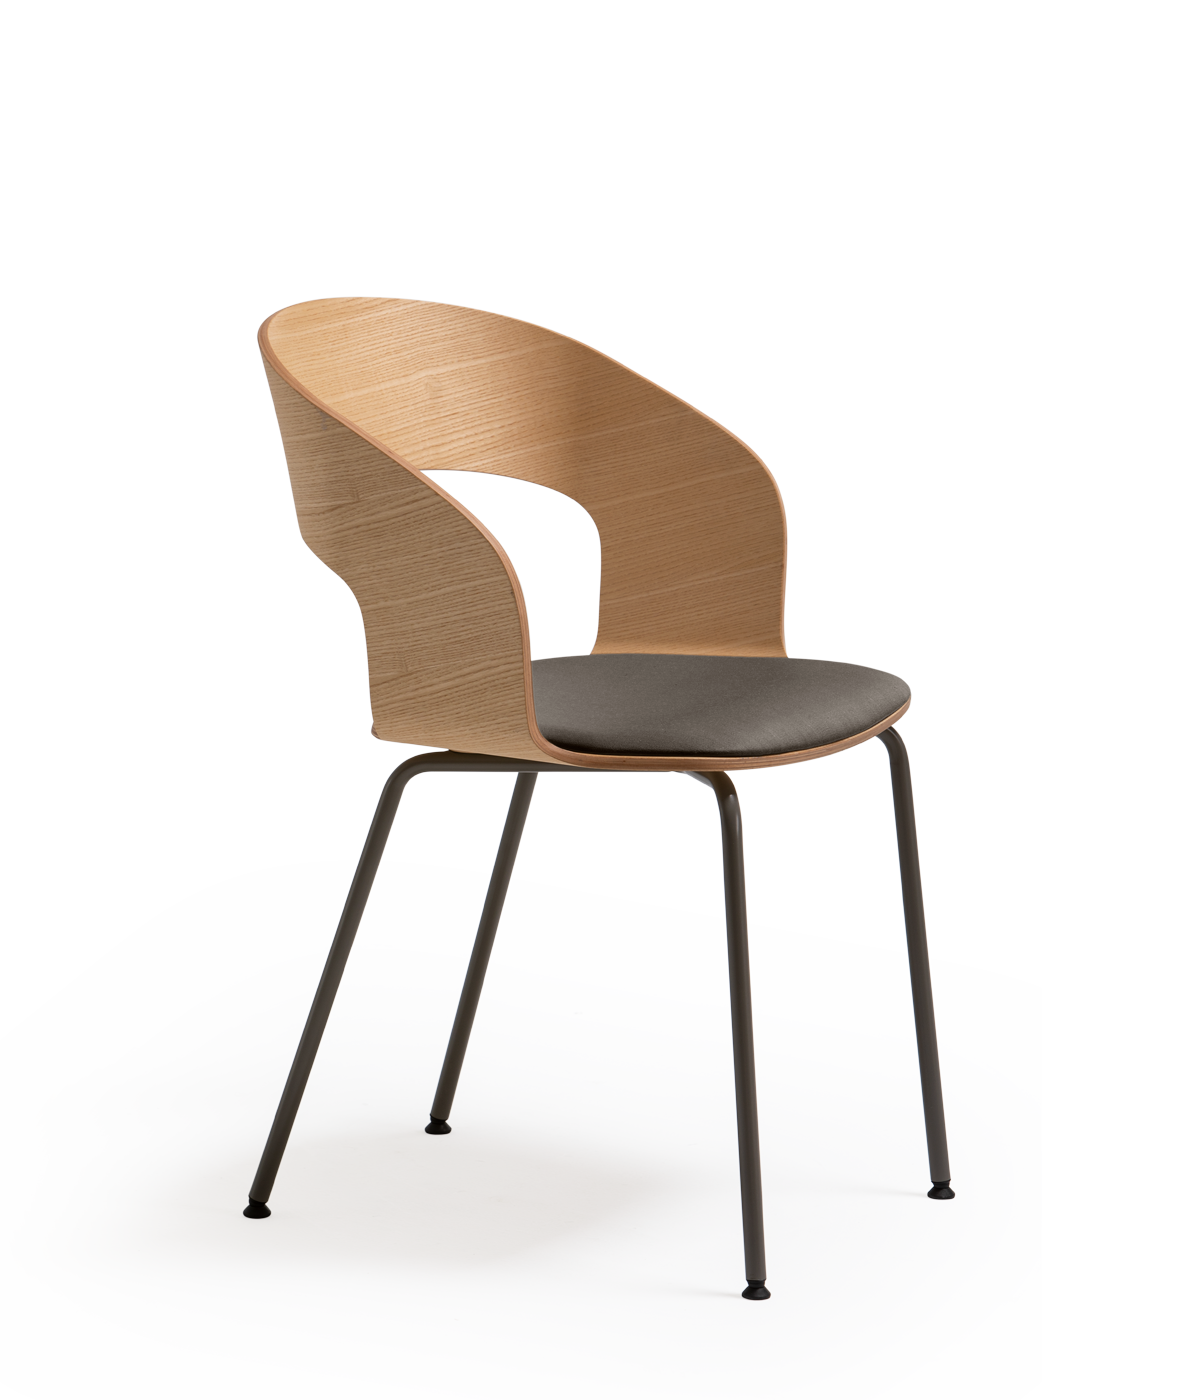 Vergés - Goose chair Model B with armrests and metallic legs